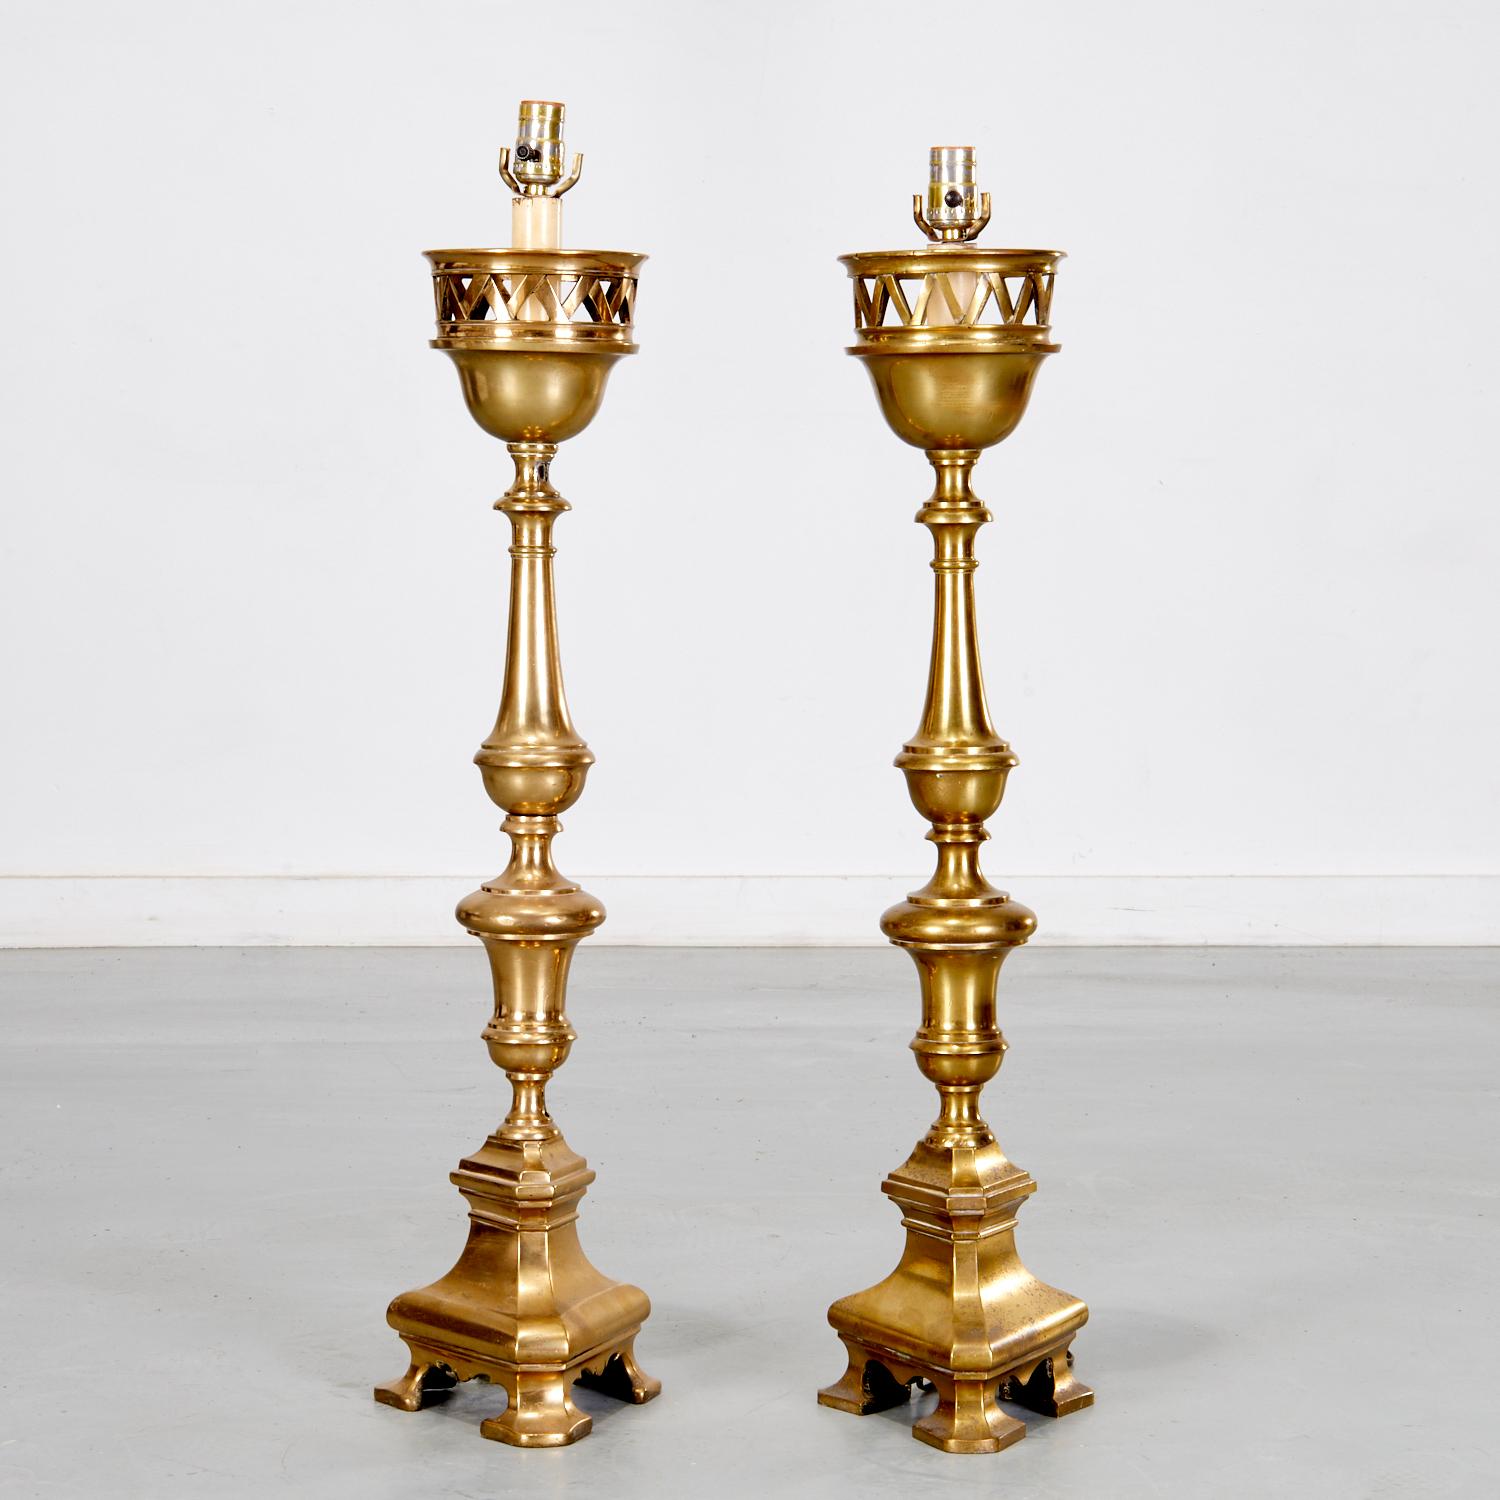 19th Century 19th C. Pair of Heavy Brass Ecclesiastical Candlesticks Adapted to Table Lamps For Sale